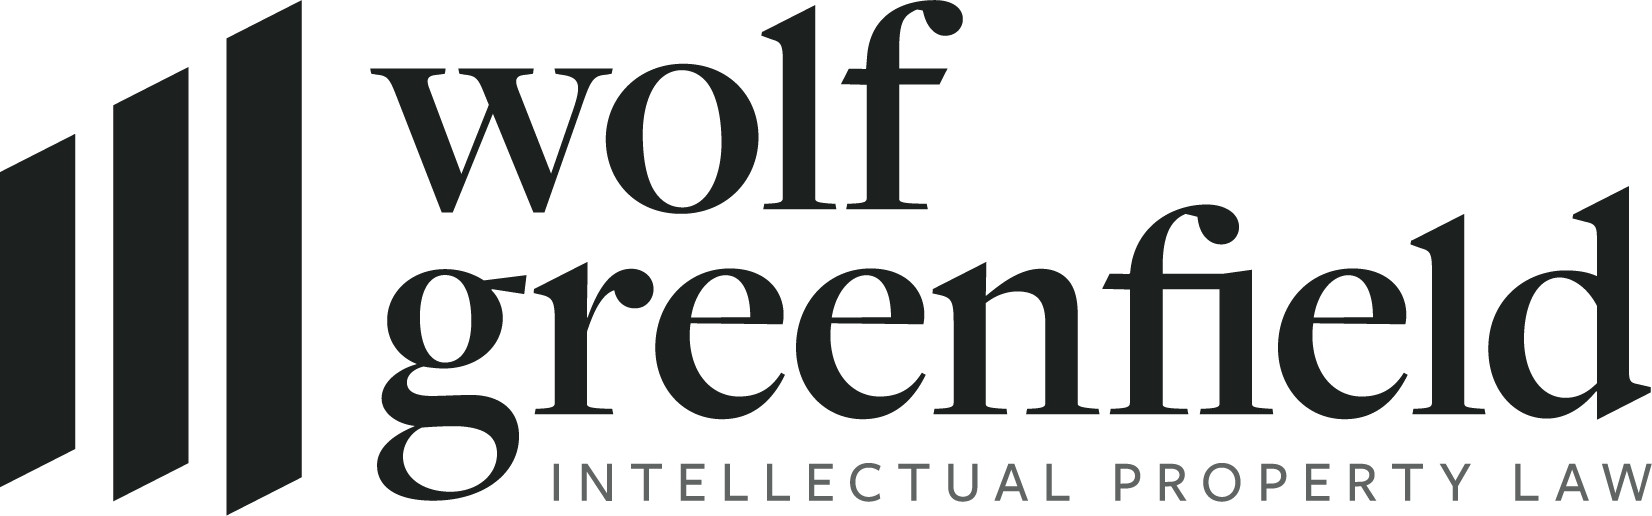 Wolf-Greenfield-Full+Tag-Logo_Solid_Ascend-Site_dark